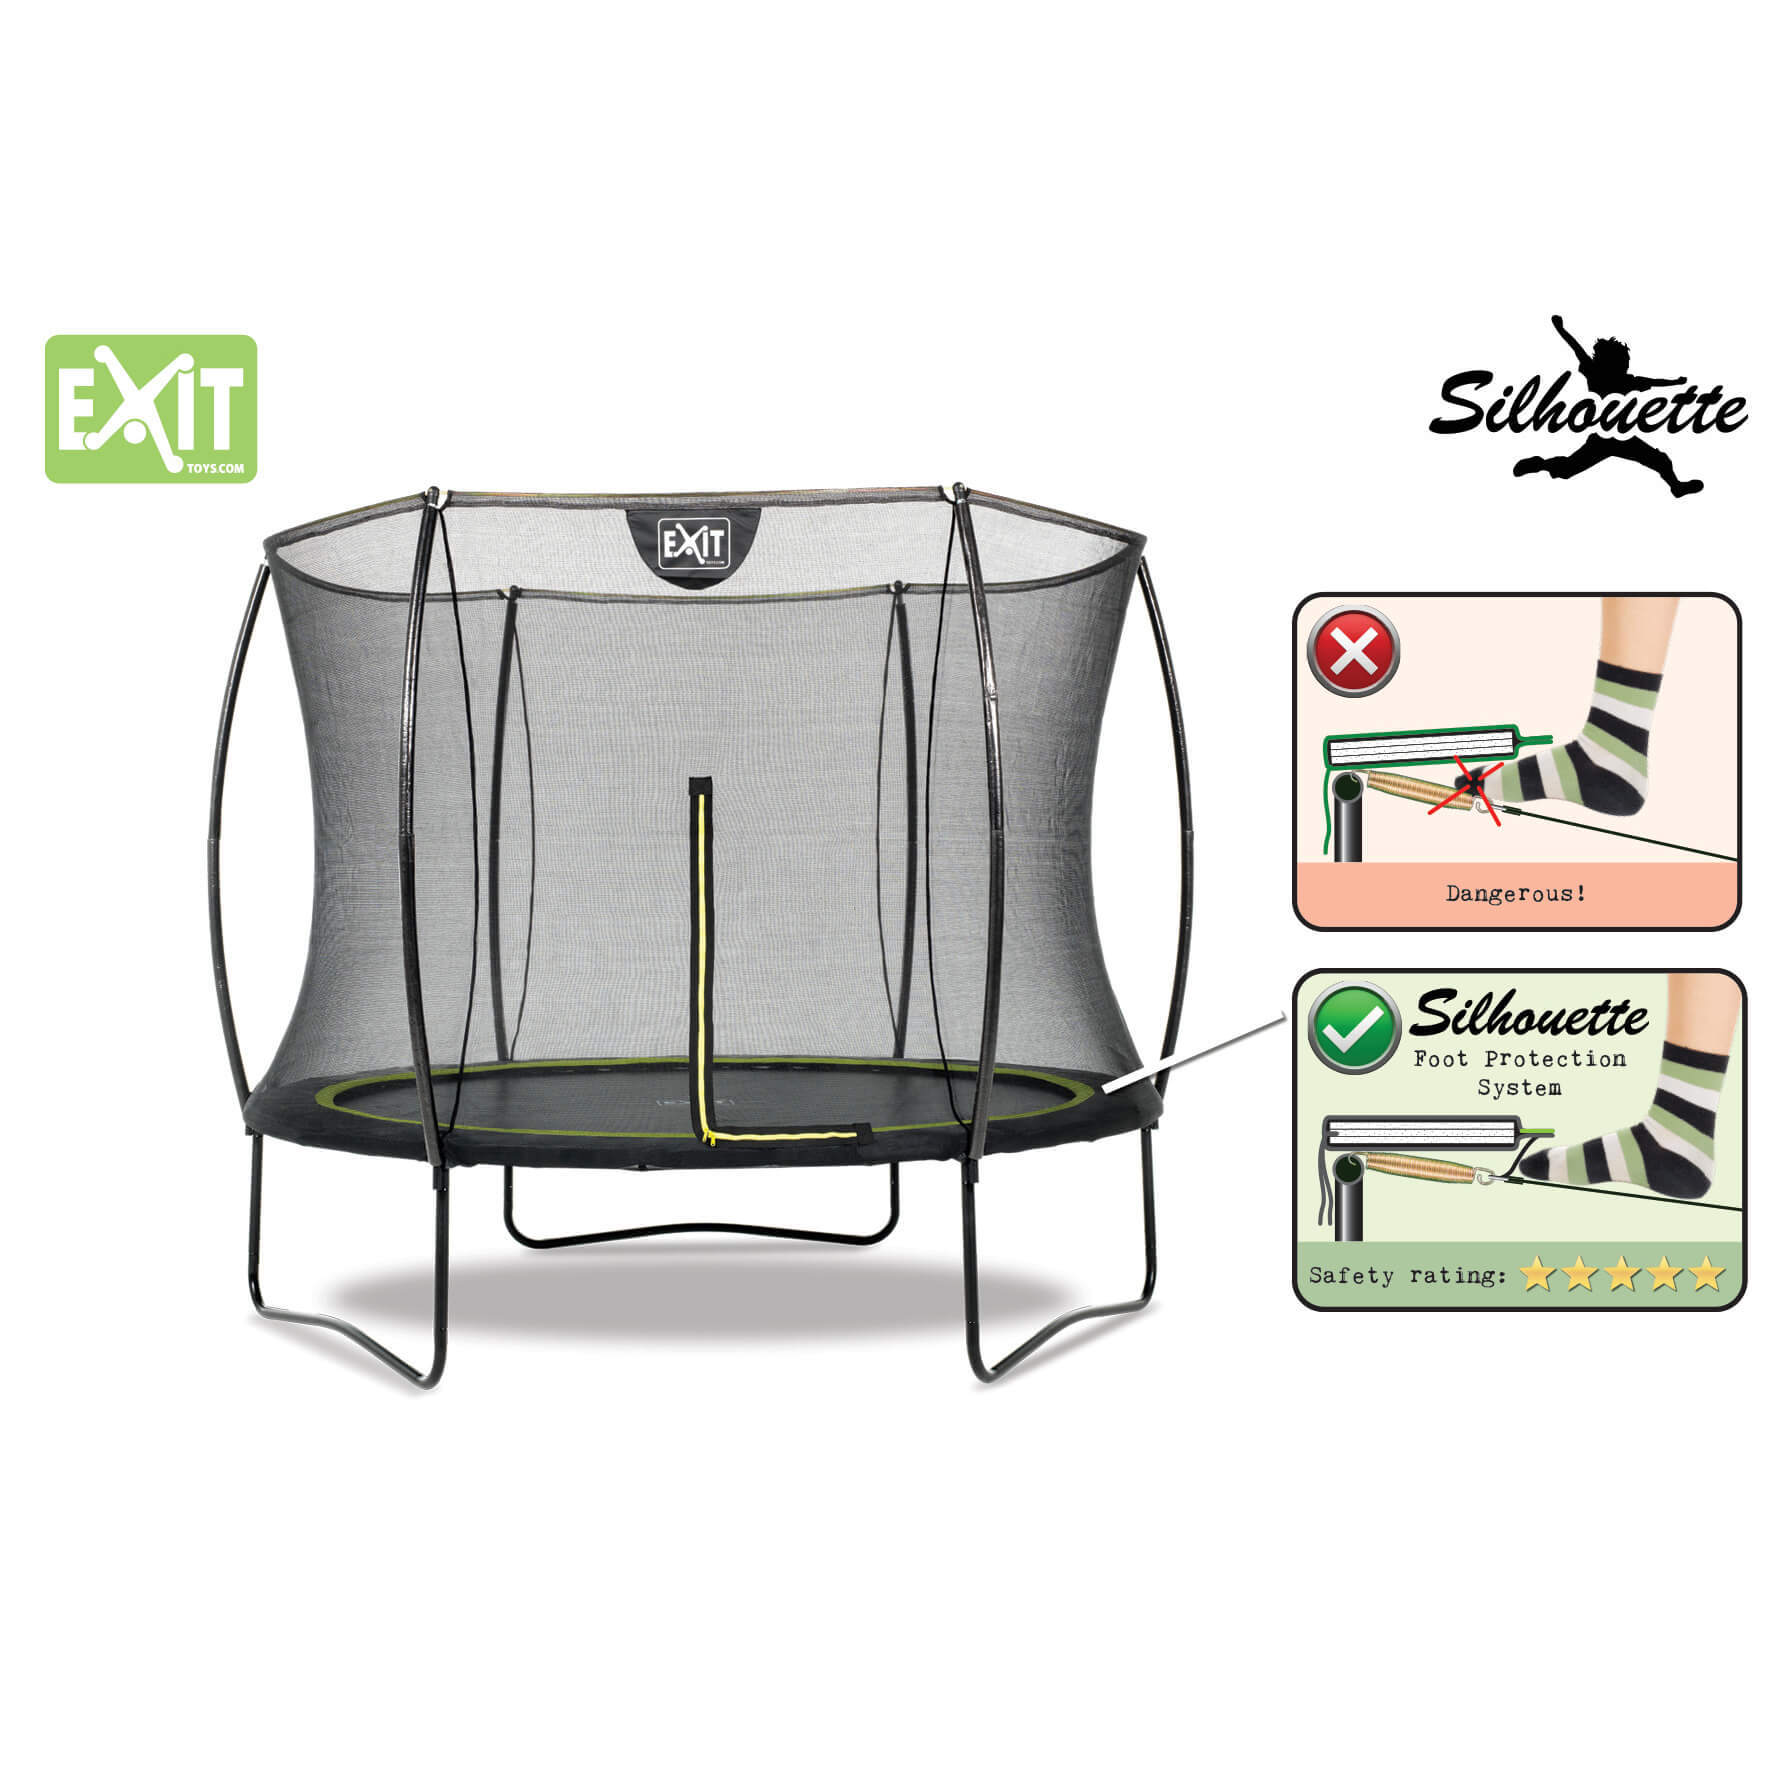 EXIT Toys Silhouette Trampoline with Safety Net - 12ft